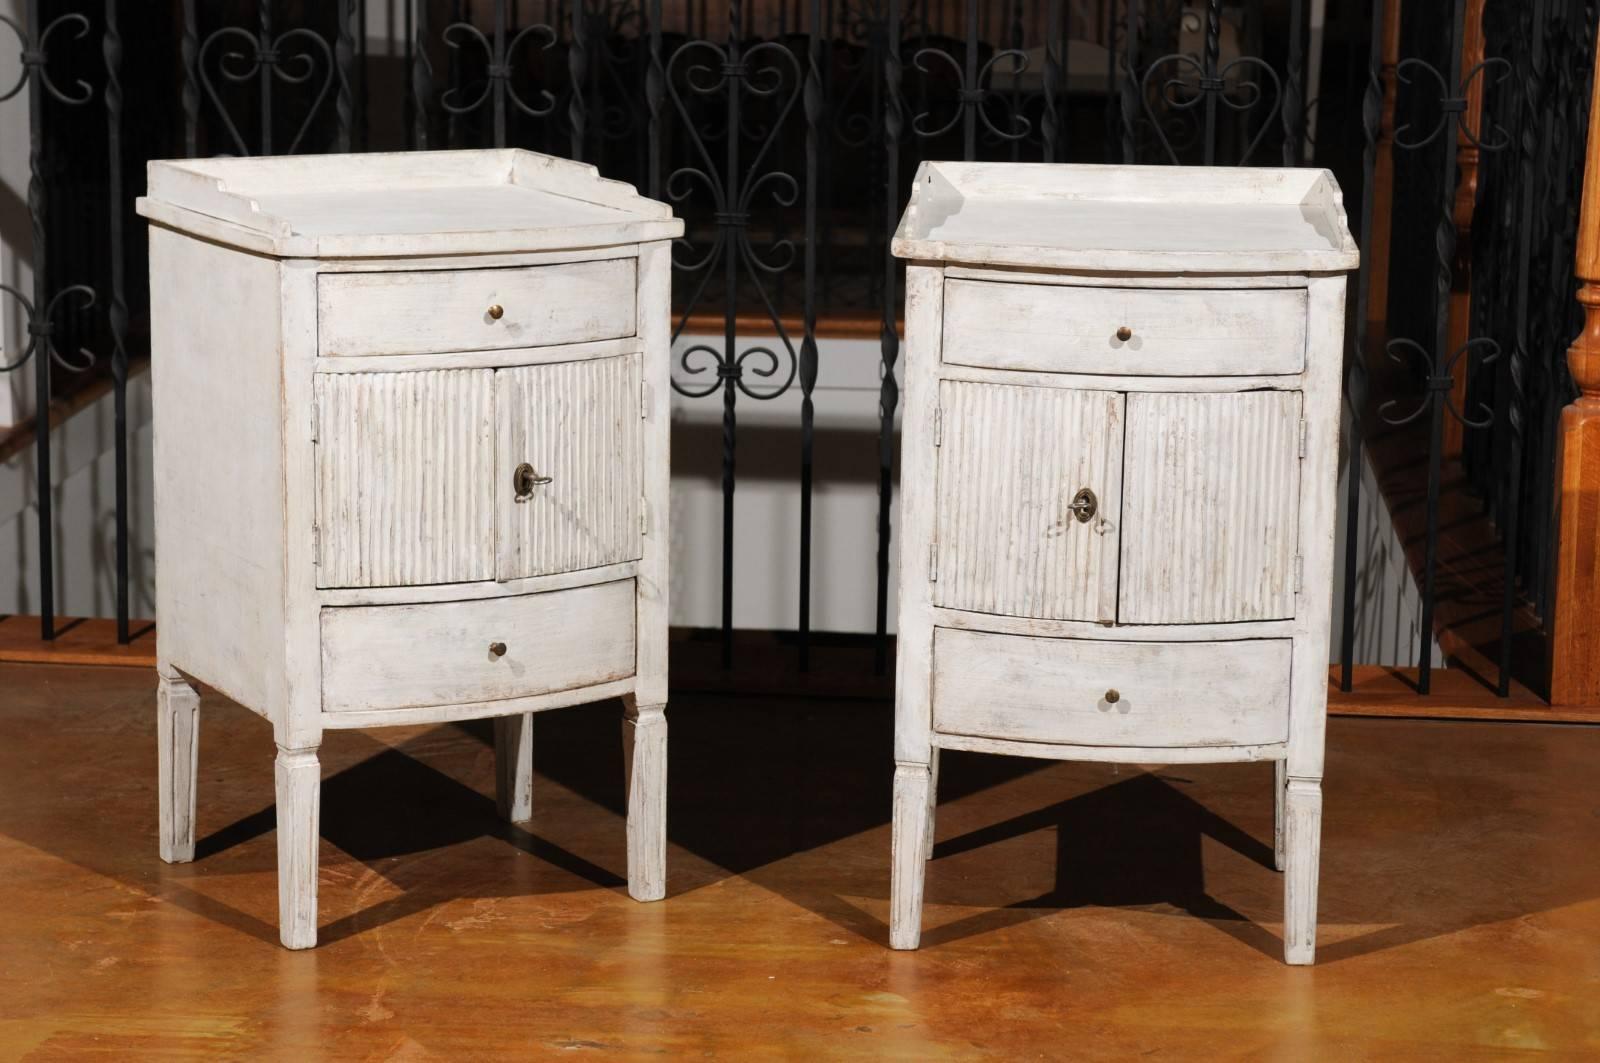 A pair of Swedish Gustavian early 19th century painted wood bedside tables from Göteborg with drawers and doors. Born during the early years of the 19th century in the Southwestern city of Göteborg (Gothenburg), each of this pair of Swedish bedside